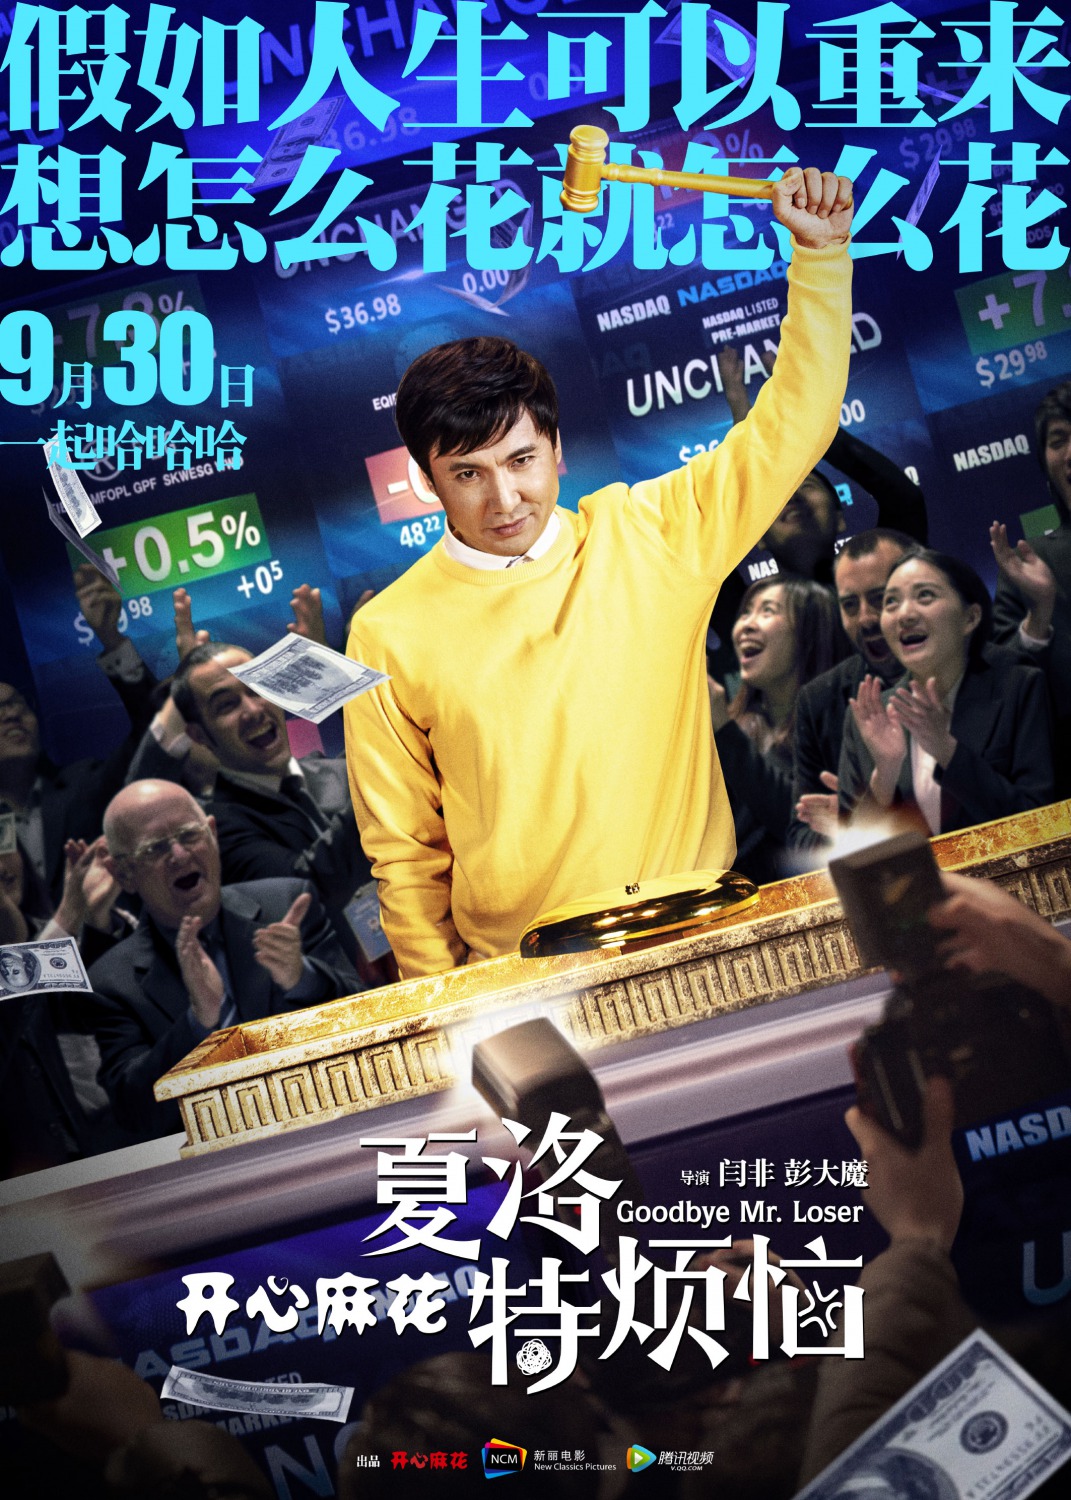 Extra Large Movie Poster Image for Xia Luo te fan nao (#2 of 4)